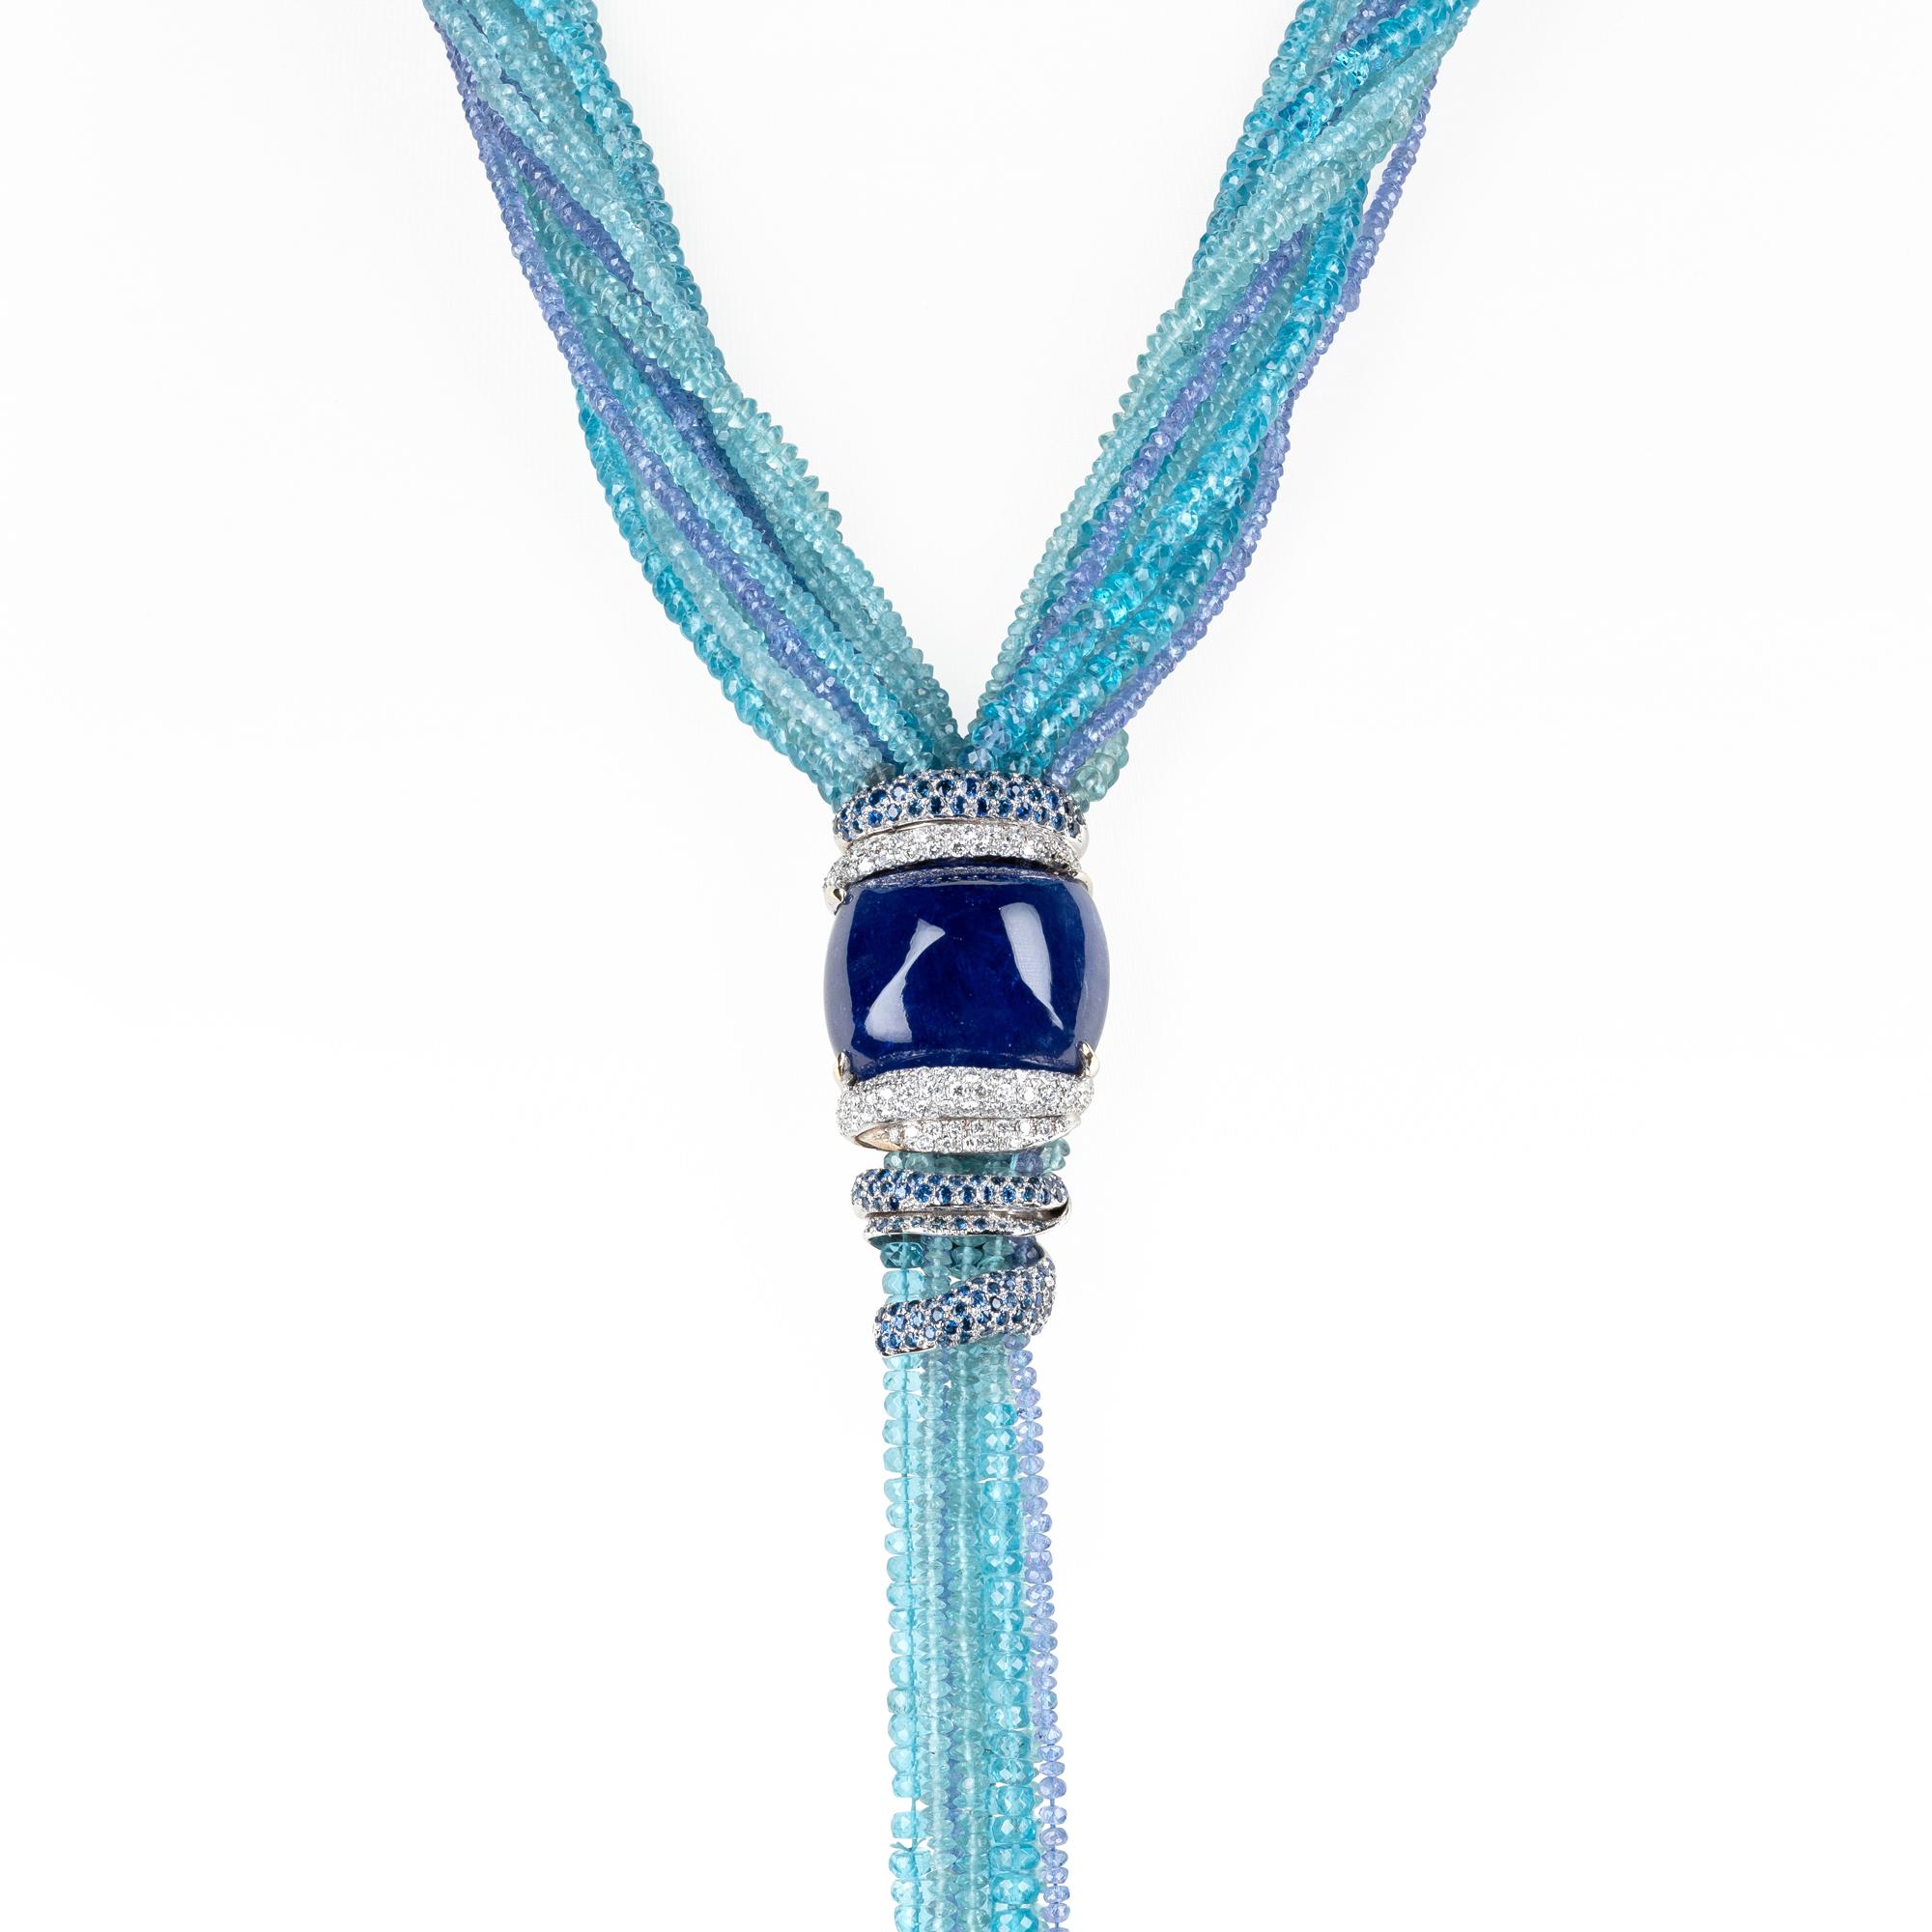 A d'Avossa Necklace from The Masterpiece Collection made in aquamarine, tanzanite and apatite wires 
A White Gold Ribbon with a pavé of Diamonds and Blu Sapphires hold a Central Cushion Cabochon Tanzanite of 150 cts

A Unique Piece

Ref. Number